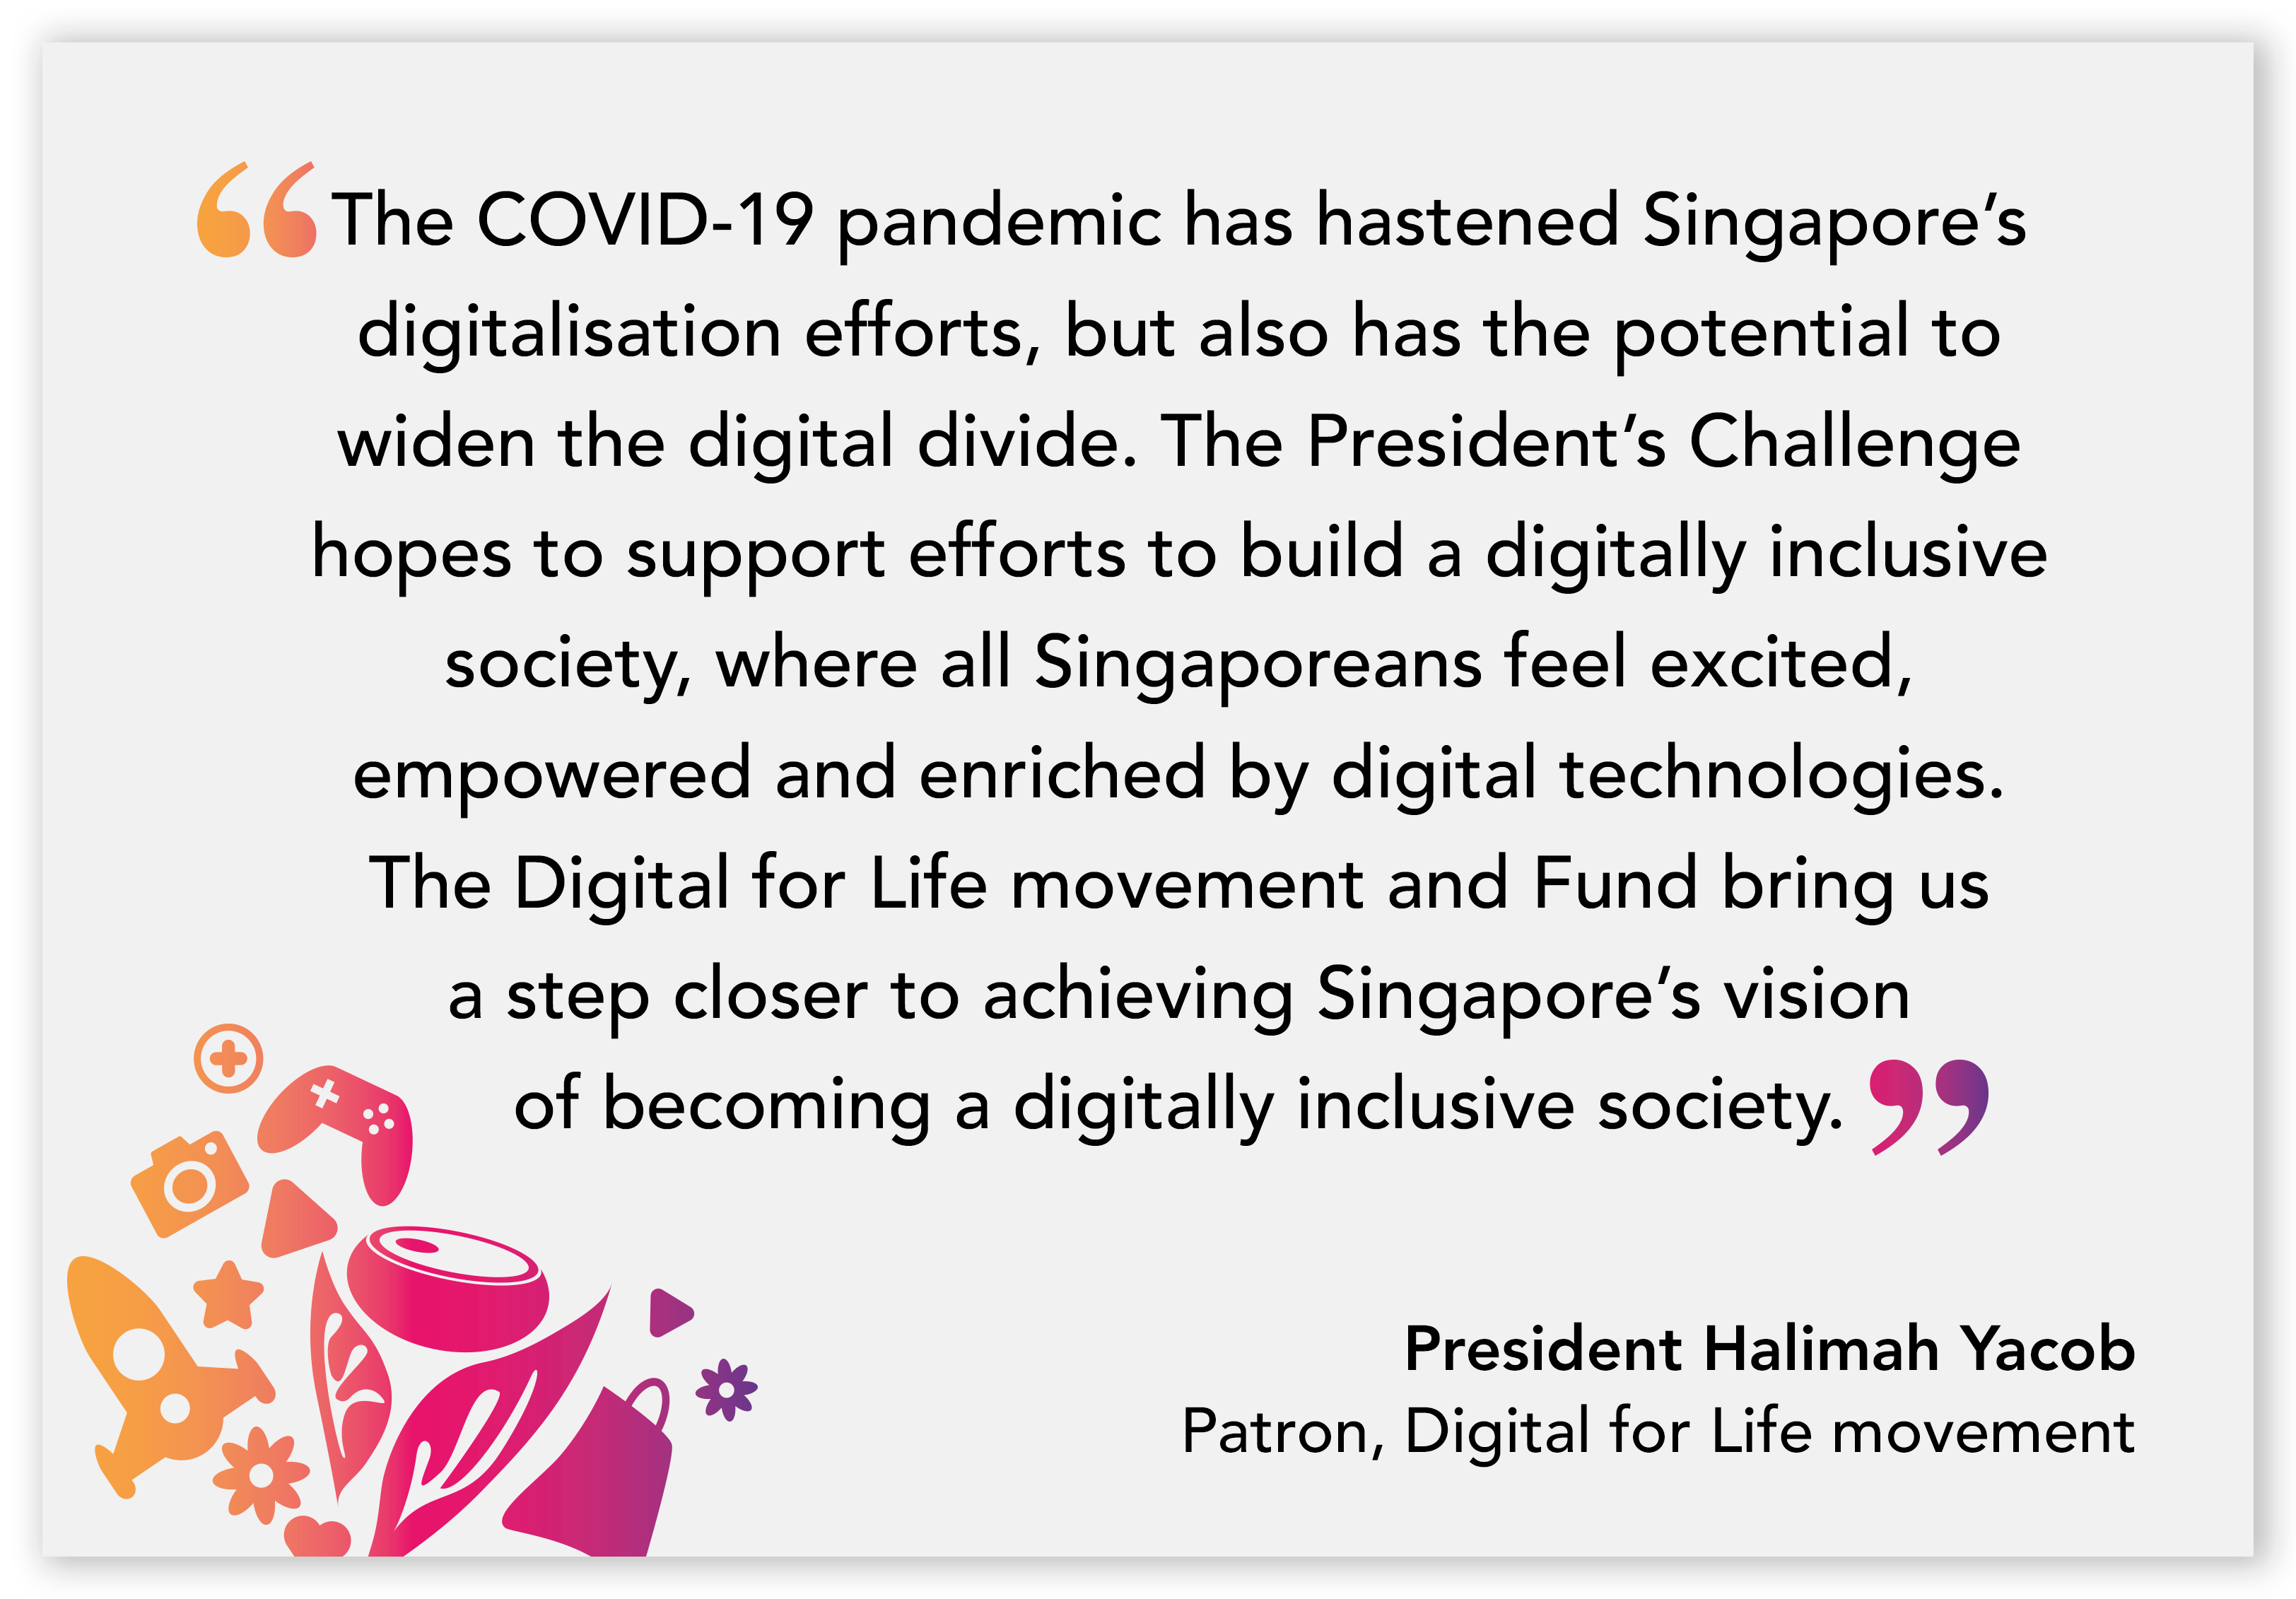 A quote from President Halimah Yacob about the Digital for Life movement